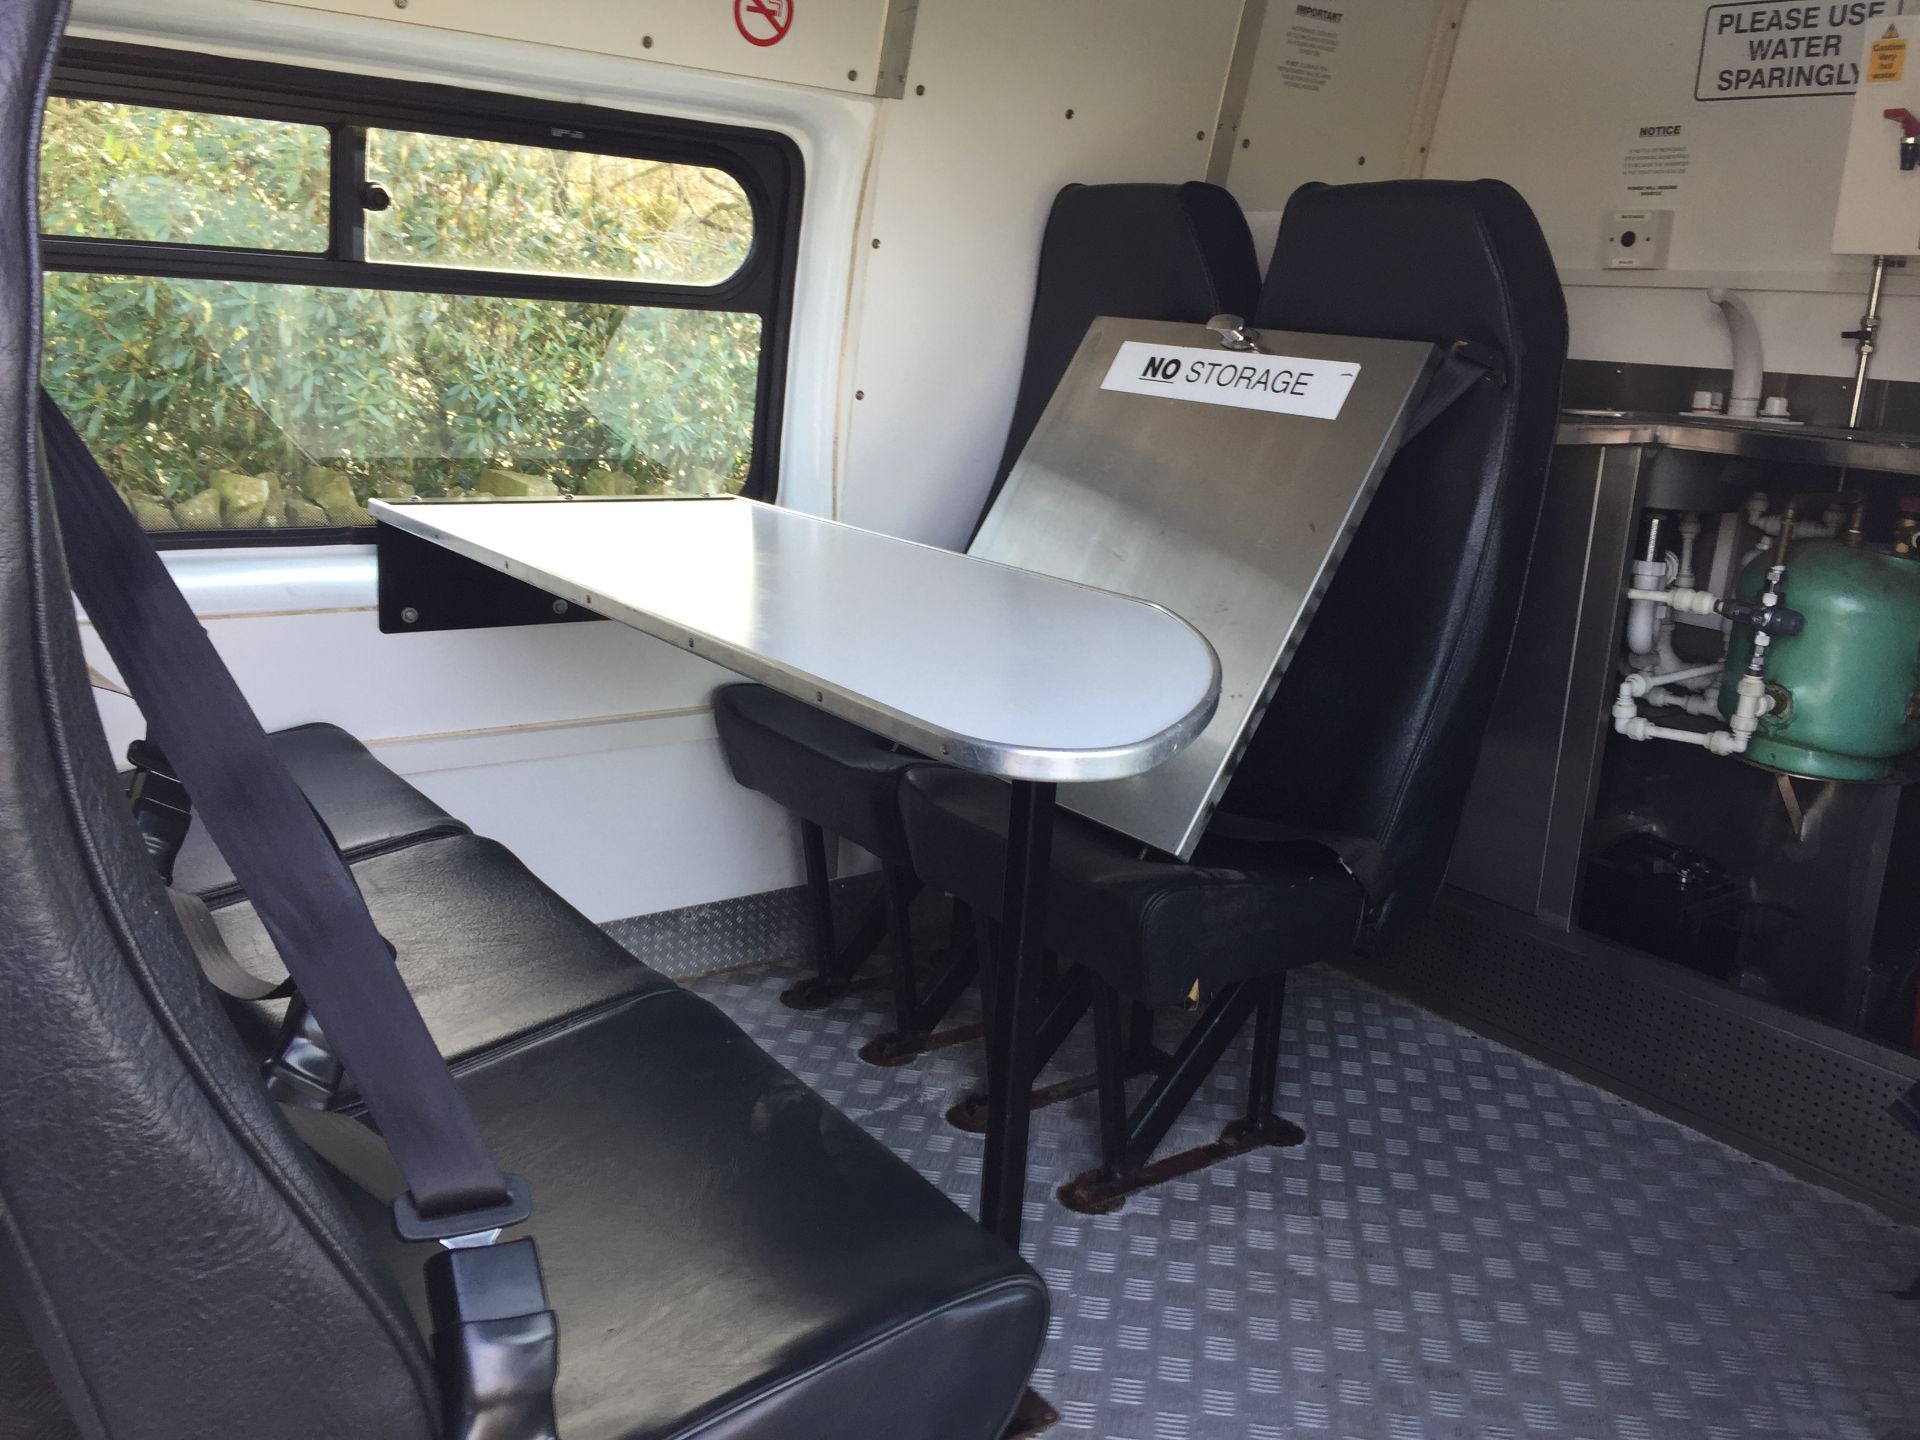 Ford Transit Welfare Van With Seating Area, Cooking Station and Toilet Ex-Commisioned Highway Mainte - Image 9 of 10